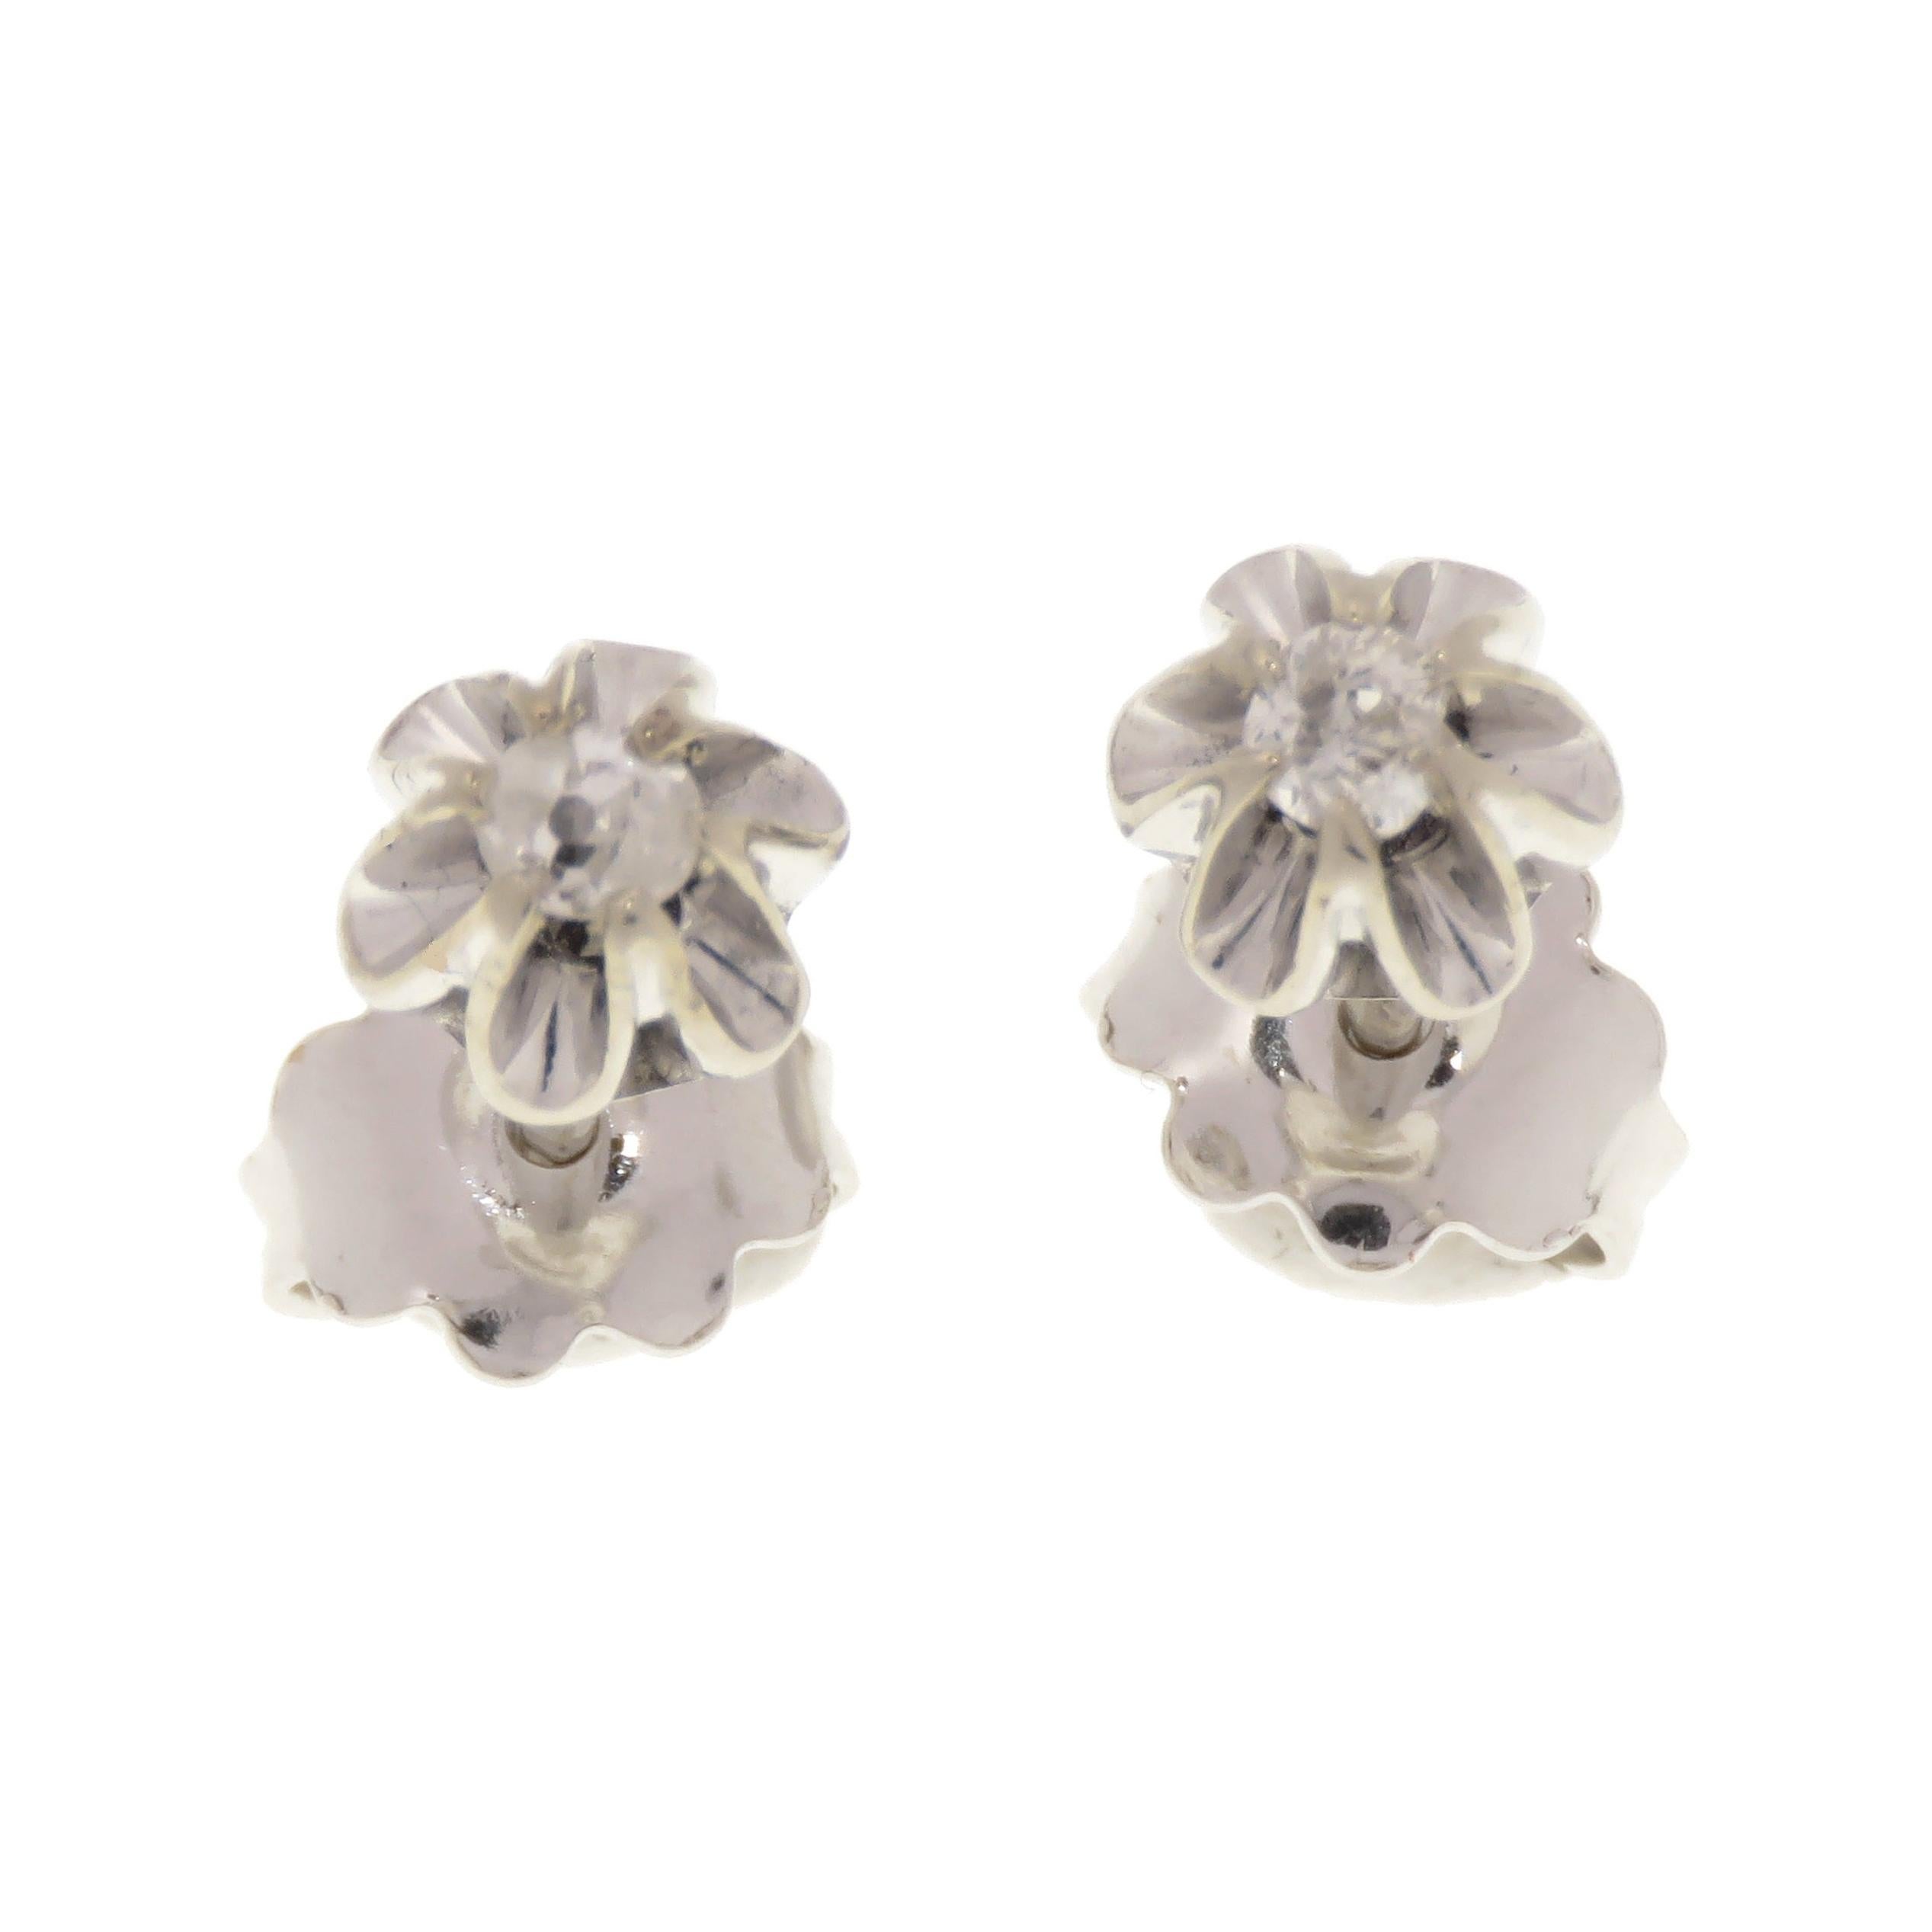 White Diamonds 18 Karat White Gold Vintage Stud Earrings Handcrafted in Italy